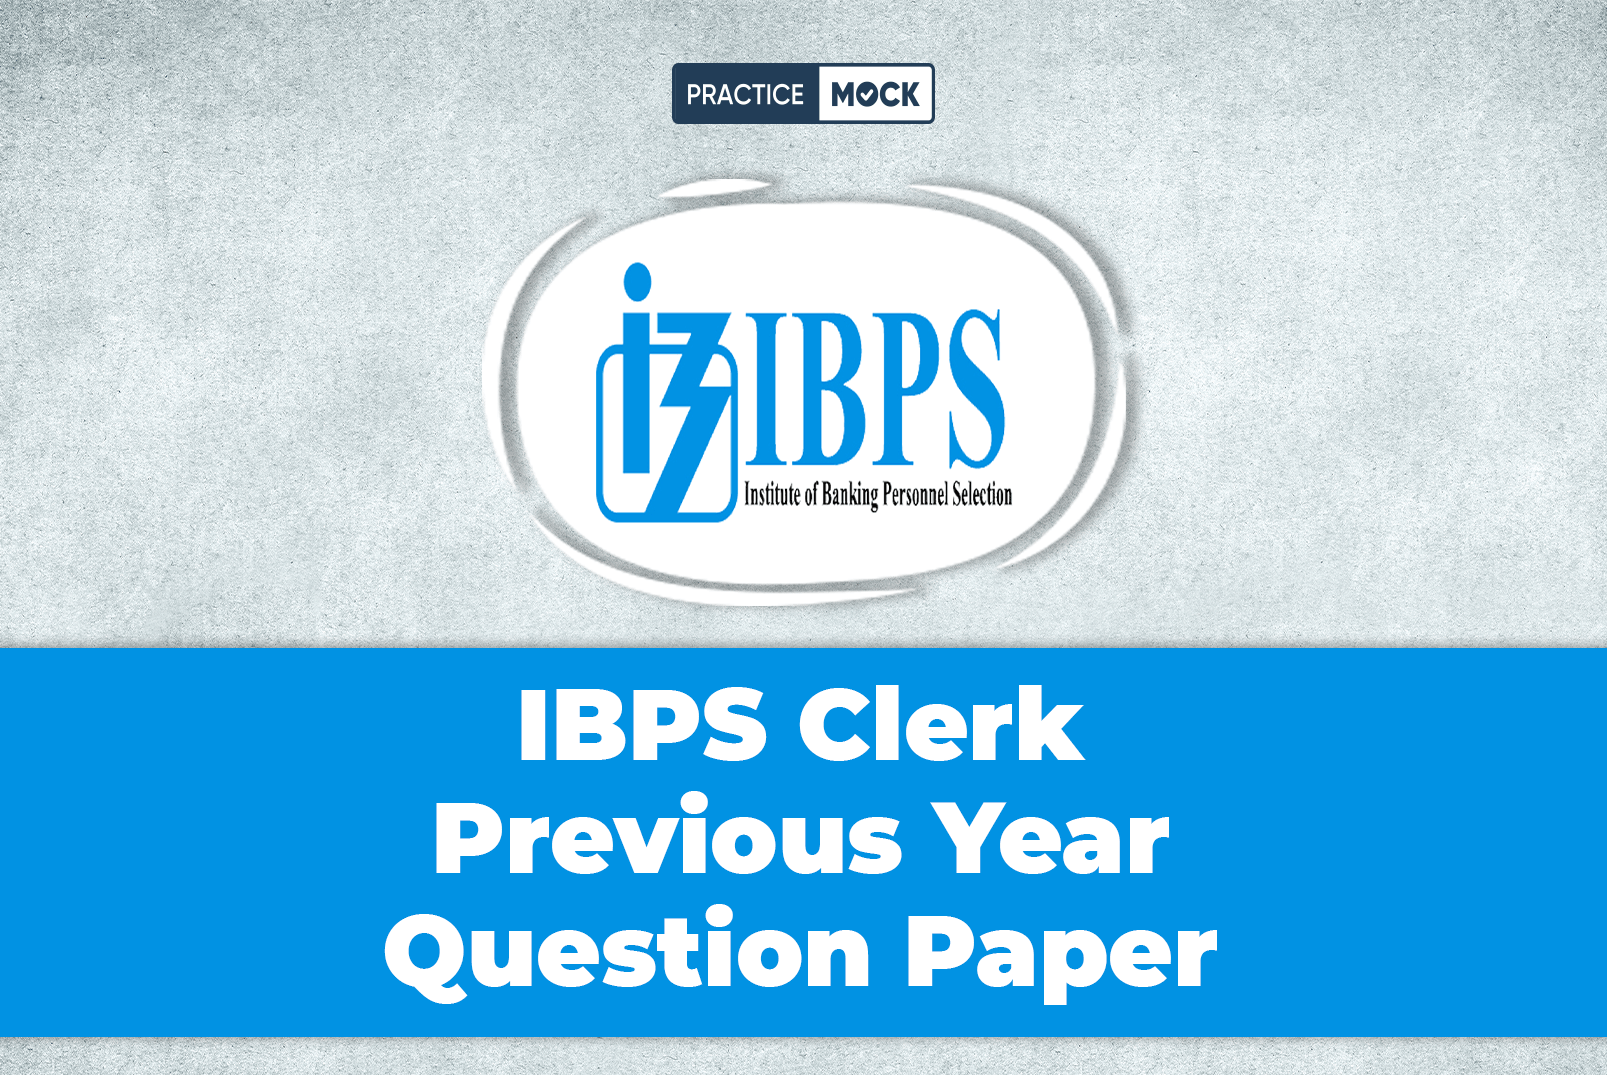 IBPS Clerk Previous Year Question Paper